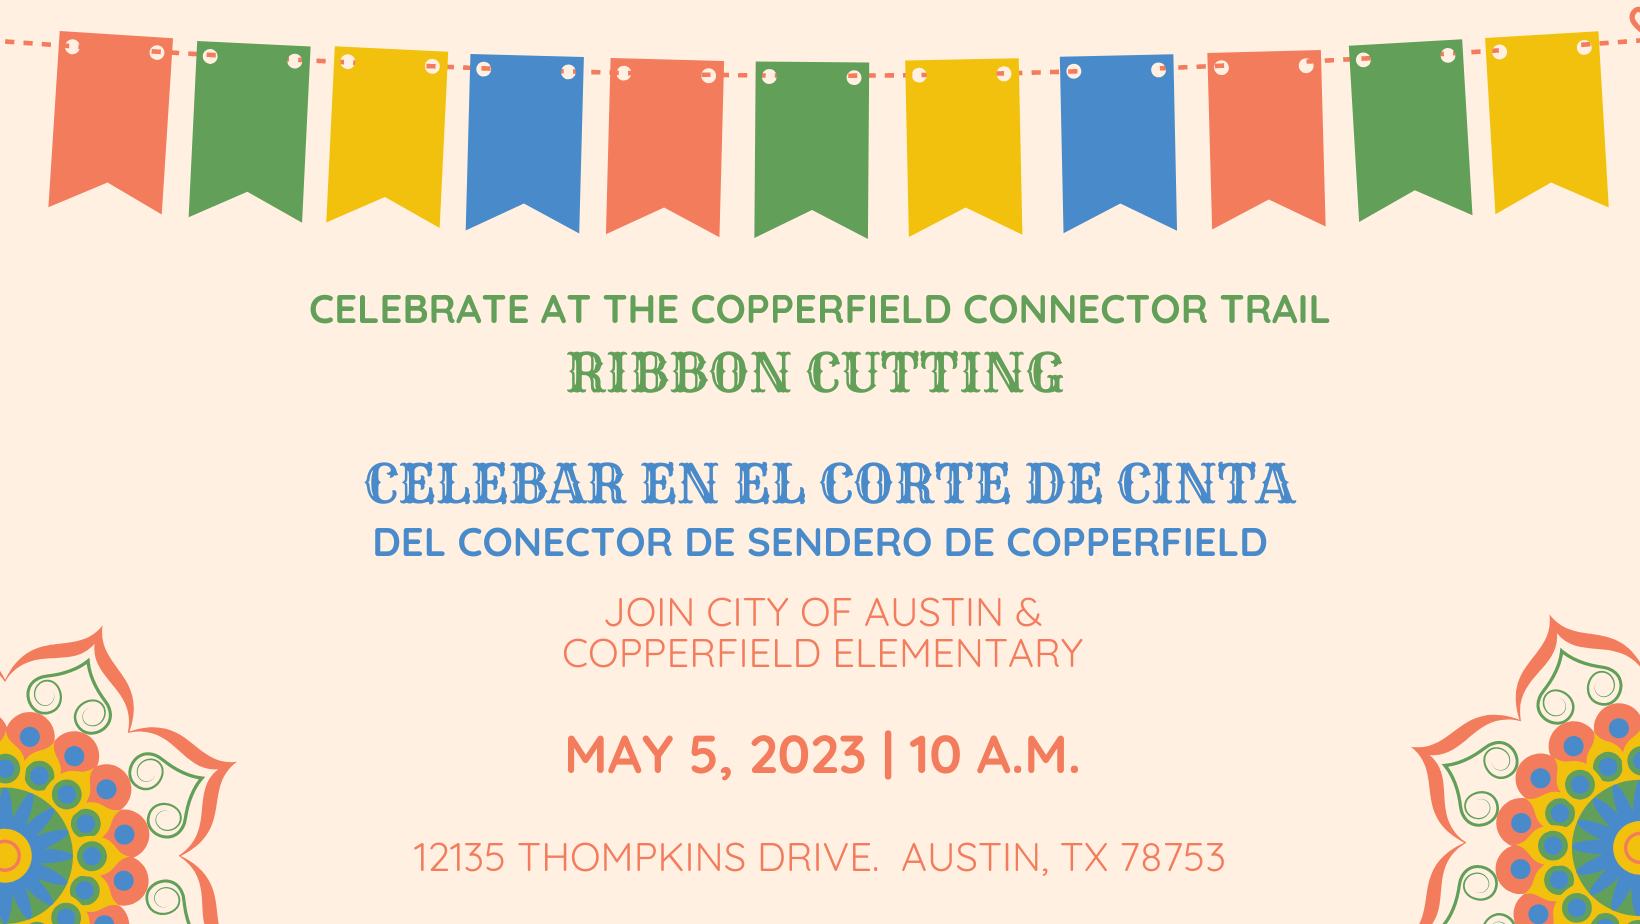 Copperfield Connector Ribbon Cutting